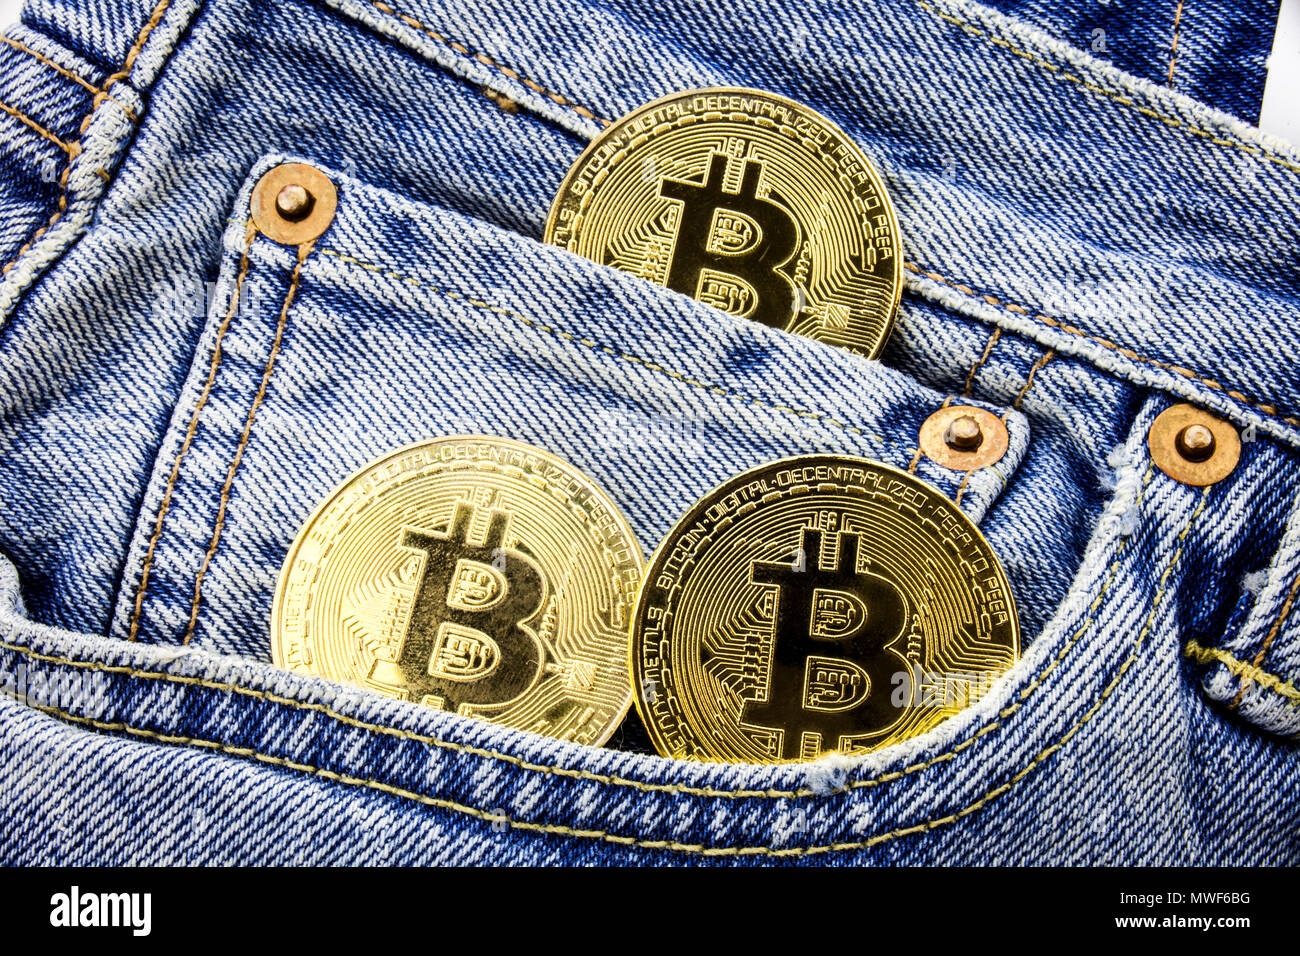 Three Golden Bitcoin Coins On The Pockets Of The Jeans Concept Of - 